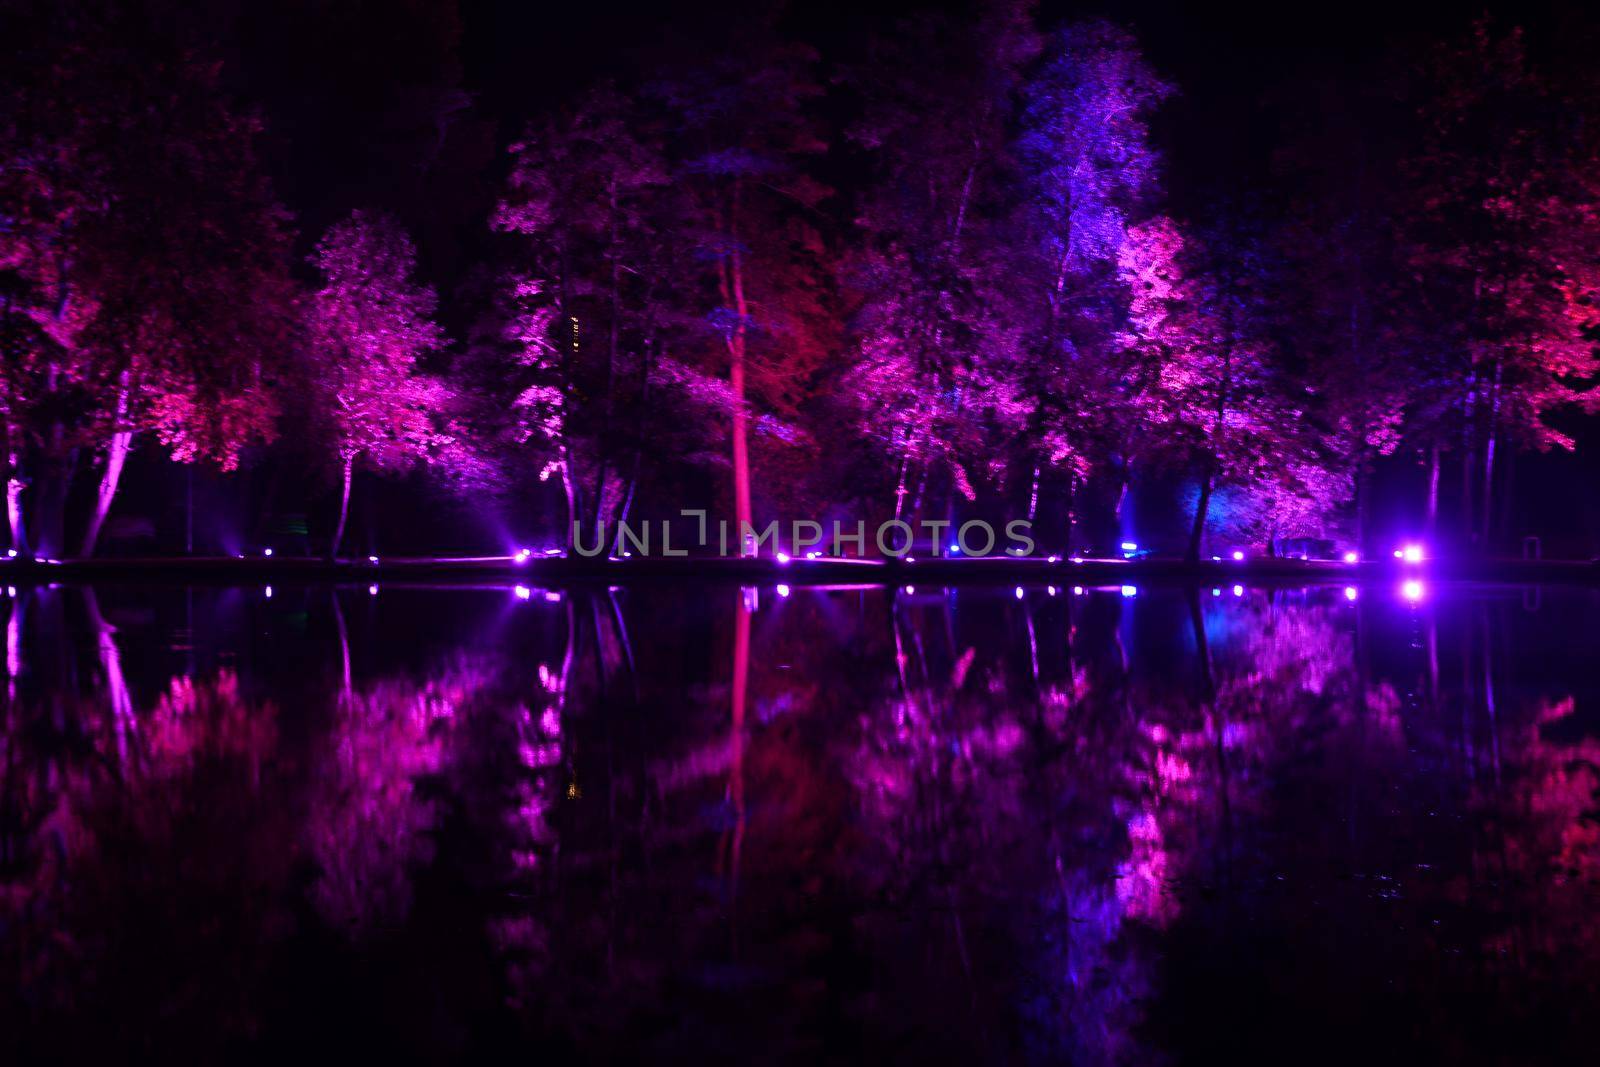 Neon light night show in a park on a city lake in Belgium, trees illuminated by KaterinaDalemans